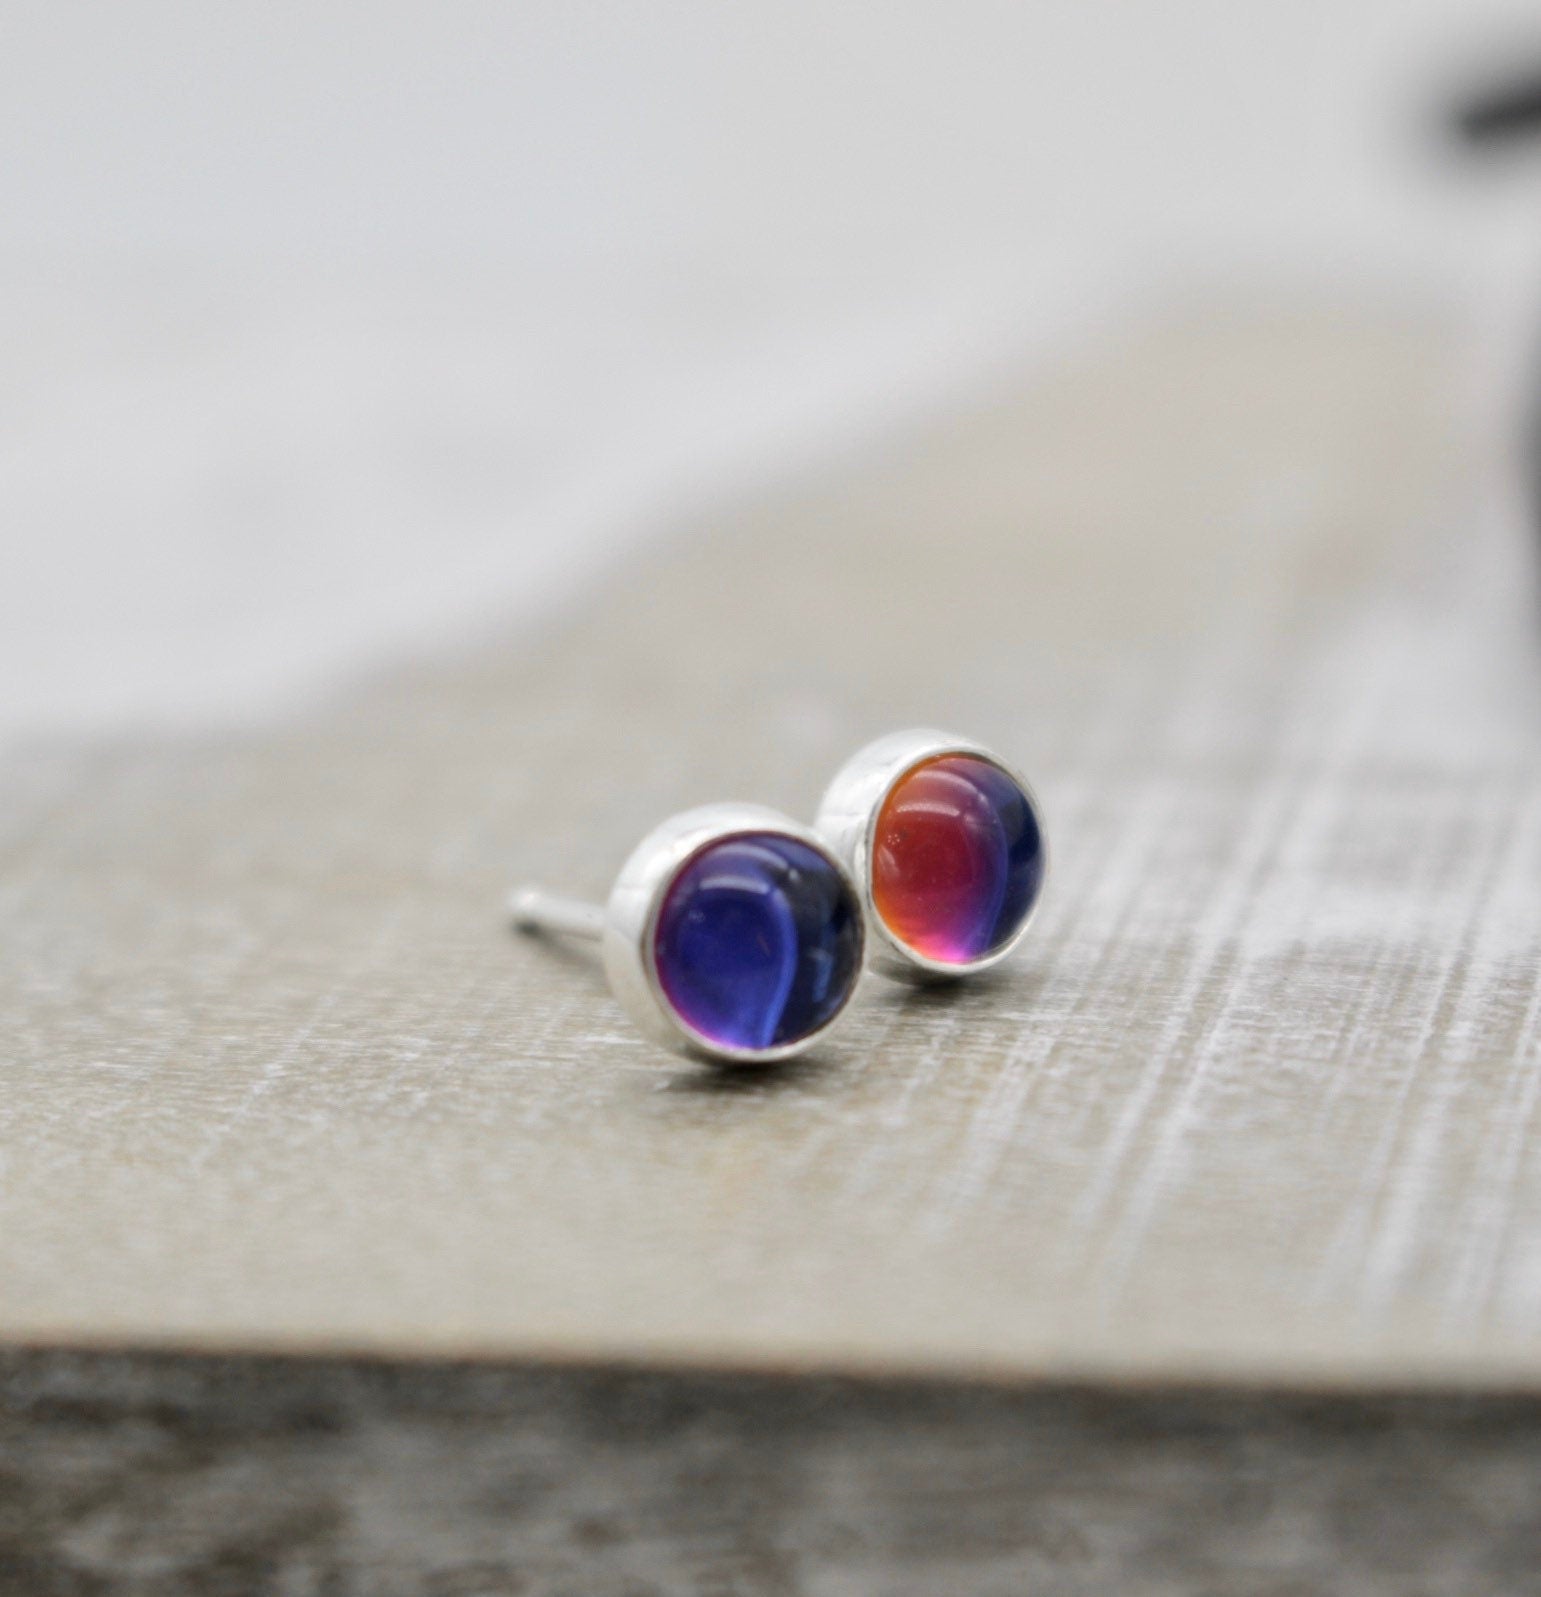 Sterling silver stud earrings - gemstone studs - color changing - gift for her - jewelry sale